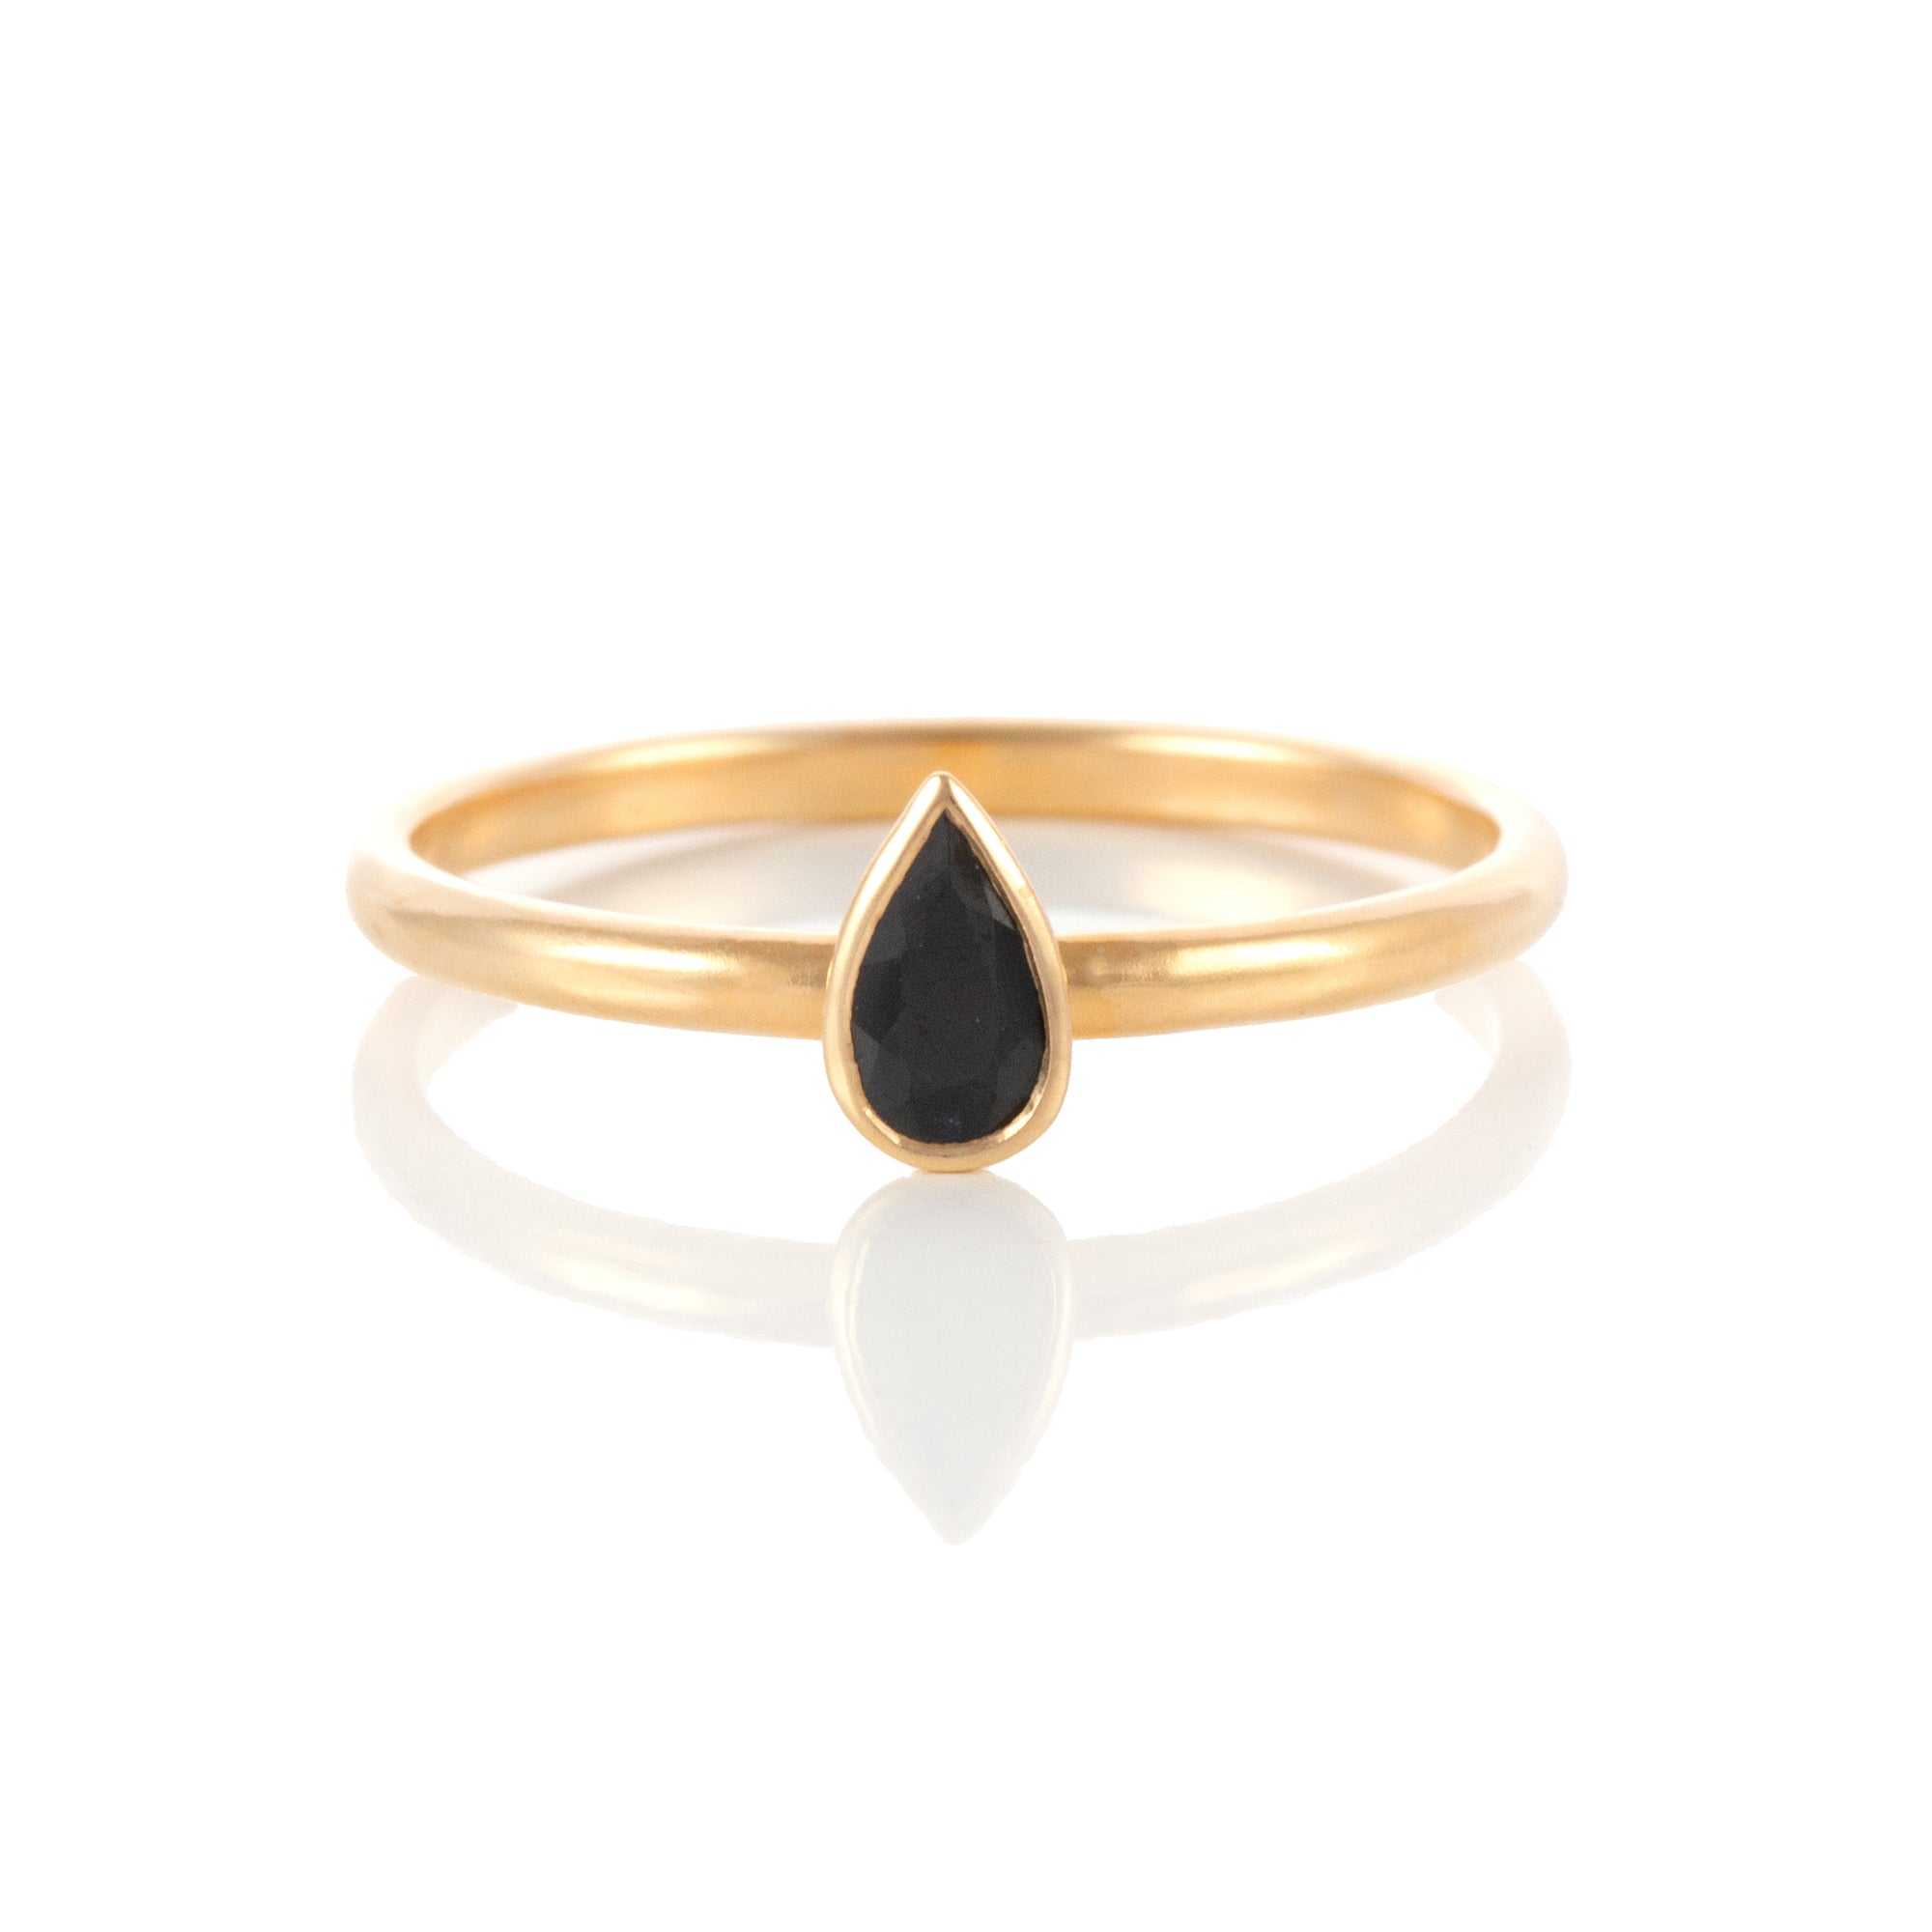 Thalia Sapphire Ring in Rose Gold